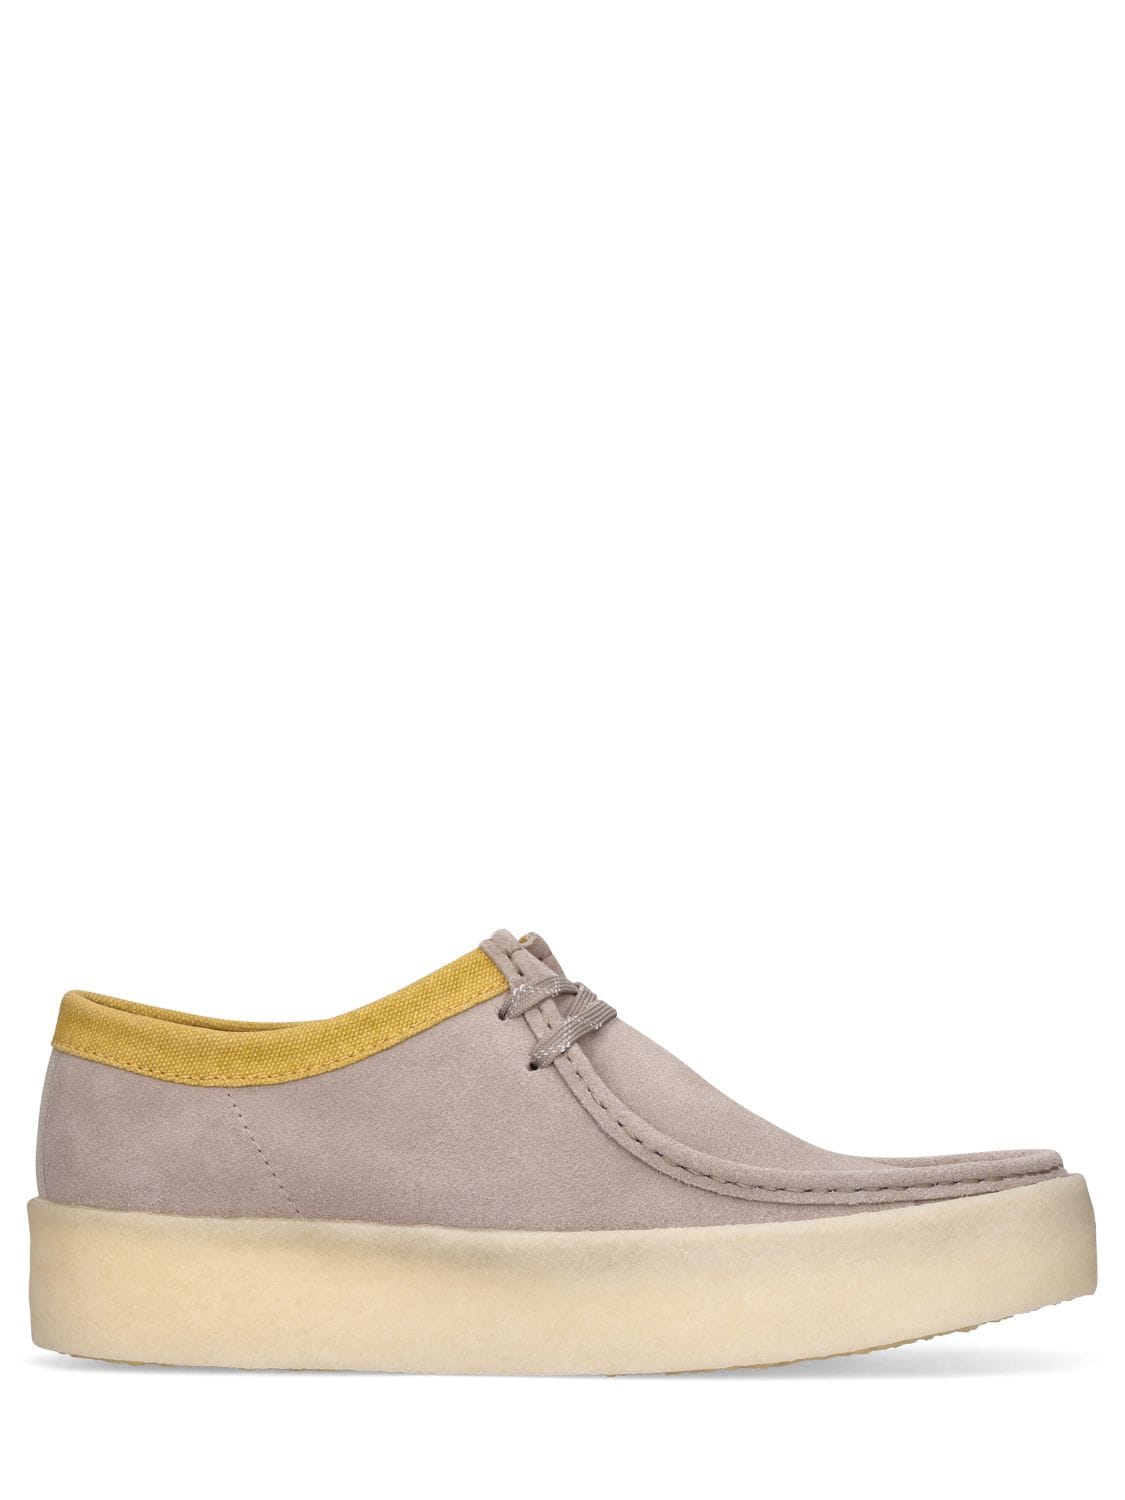 CLARKS ORIGINALS Wallabe Cup Lace-up Shoes